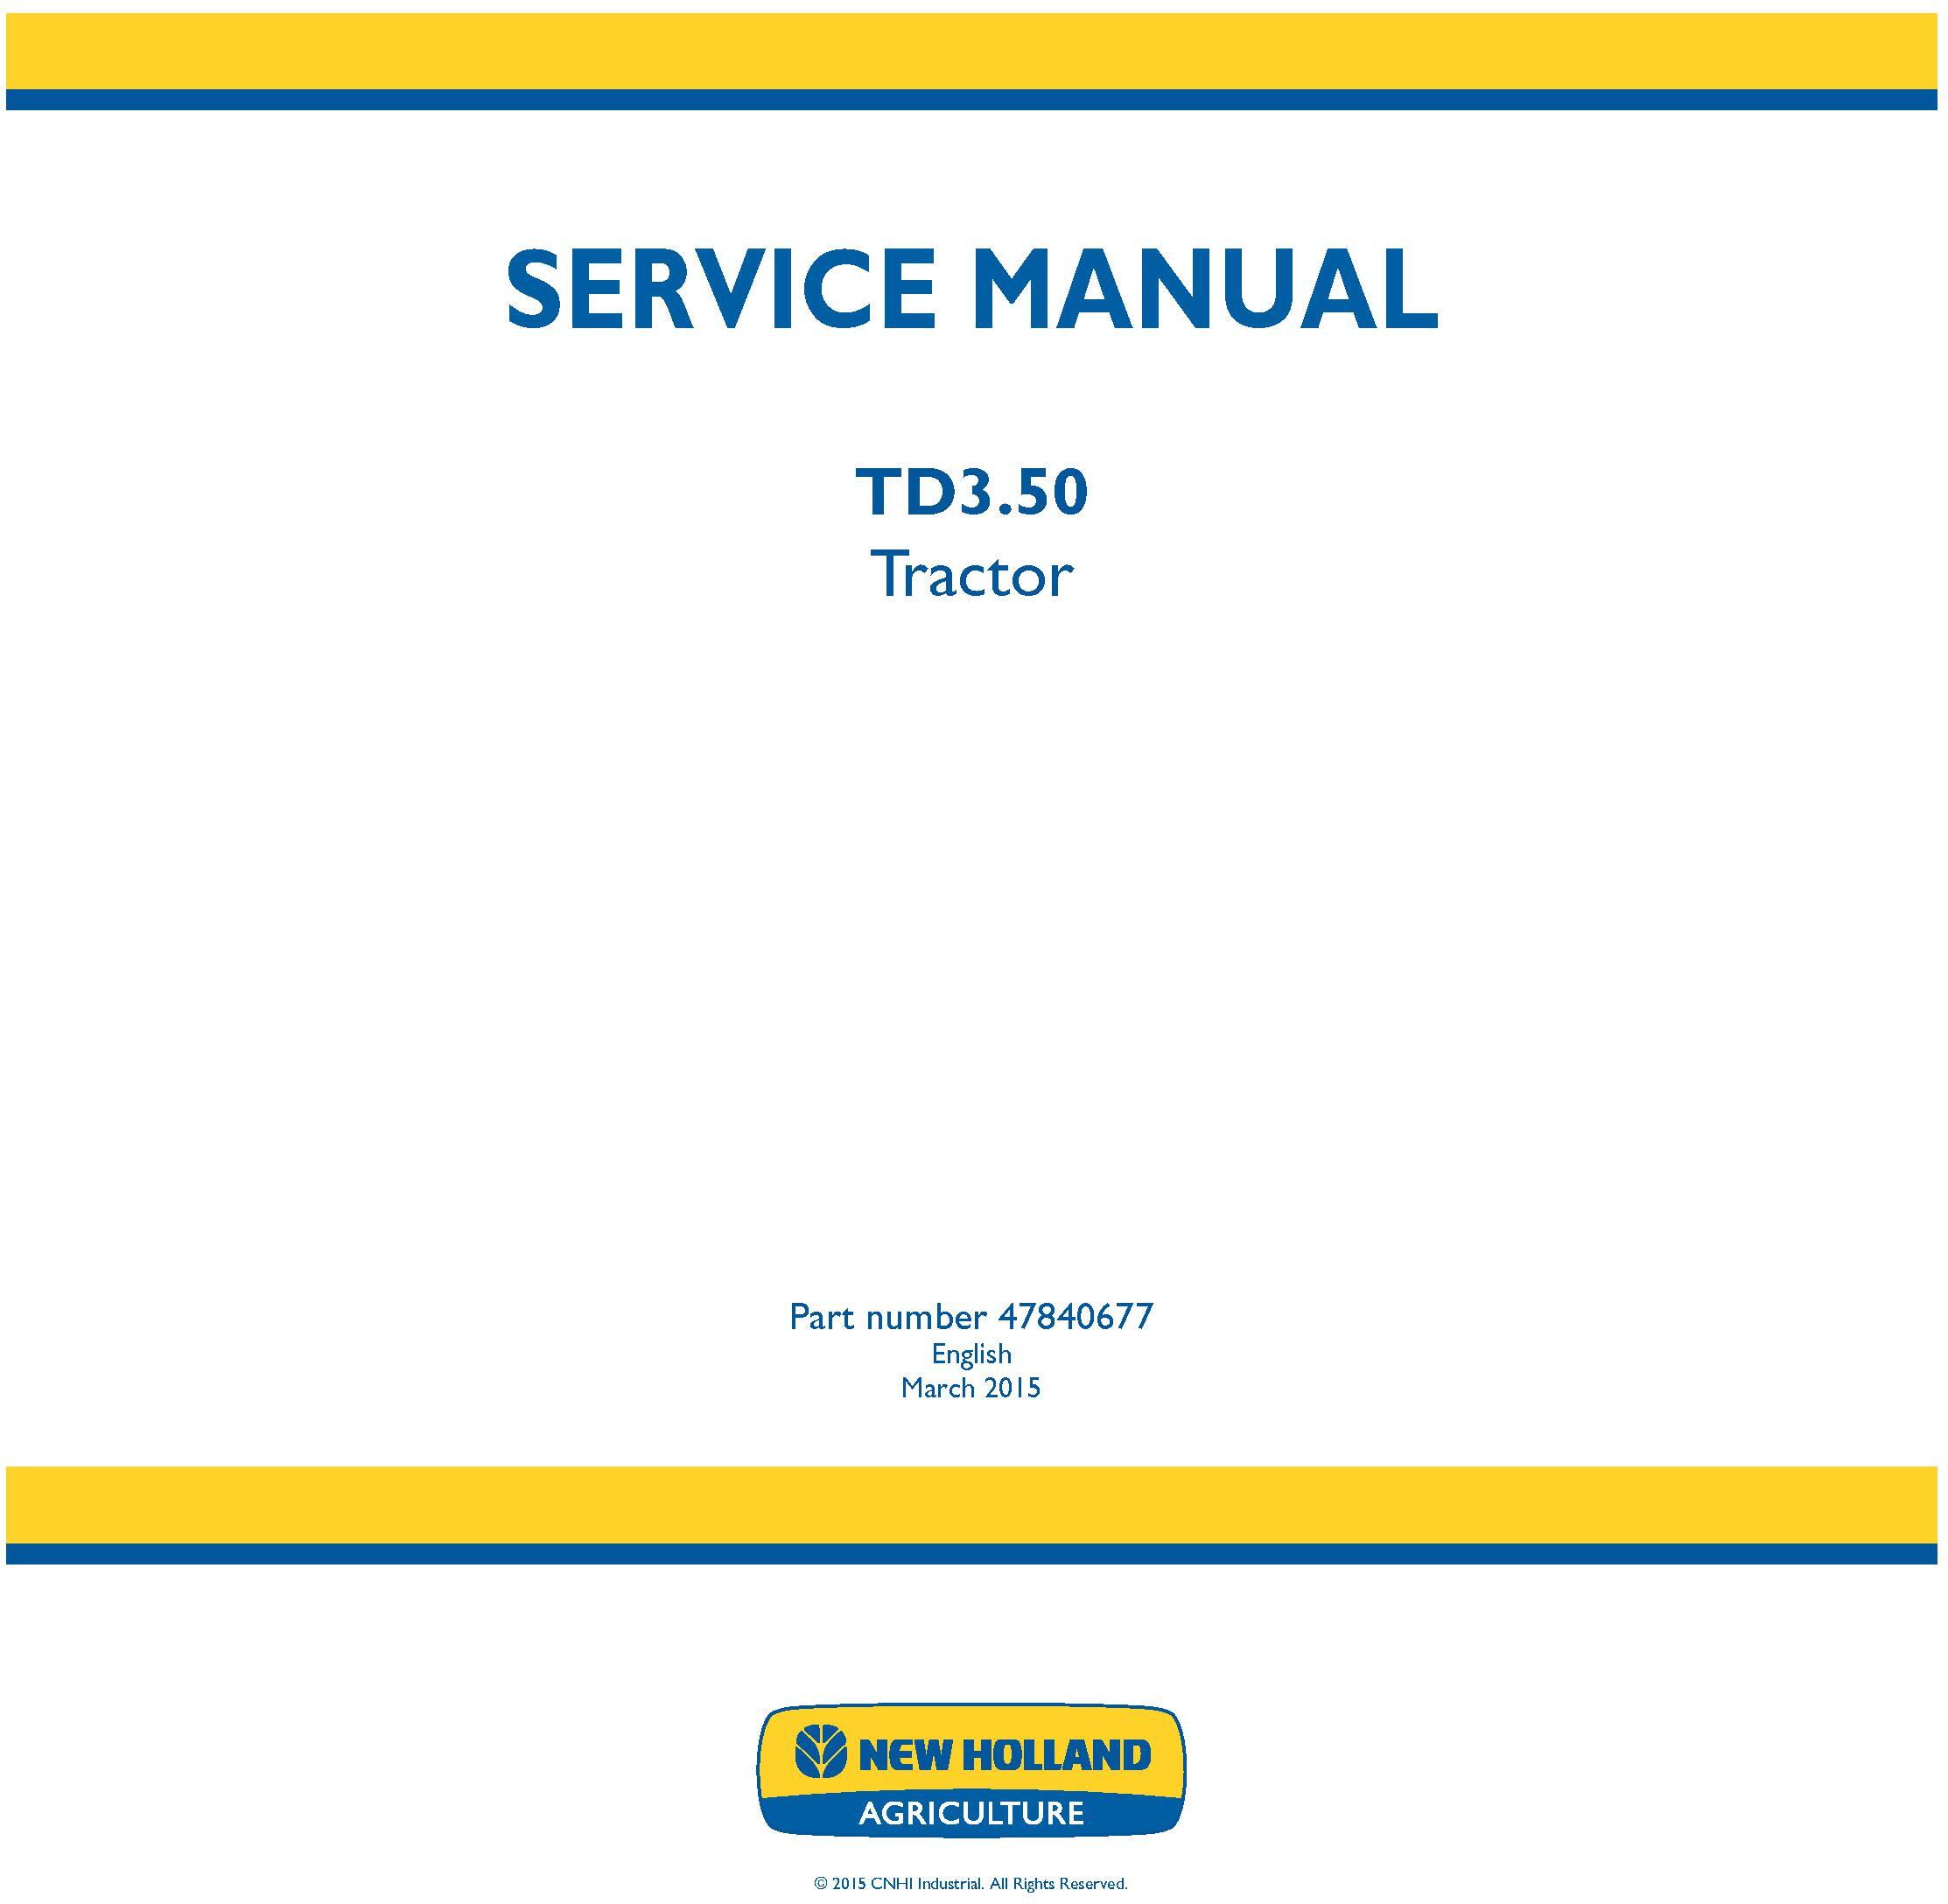 New Holland TD3.50 Tractor Service Manual - 19423